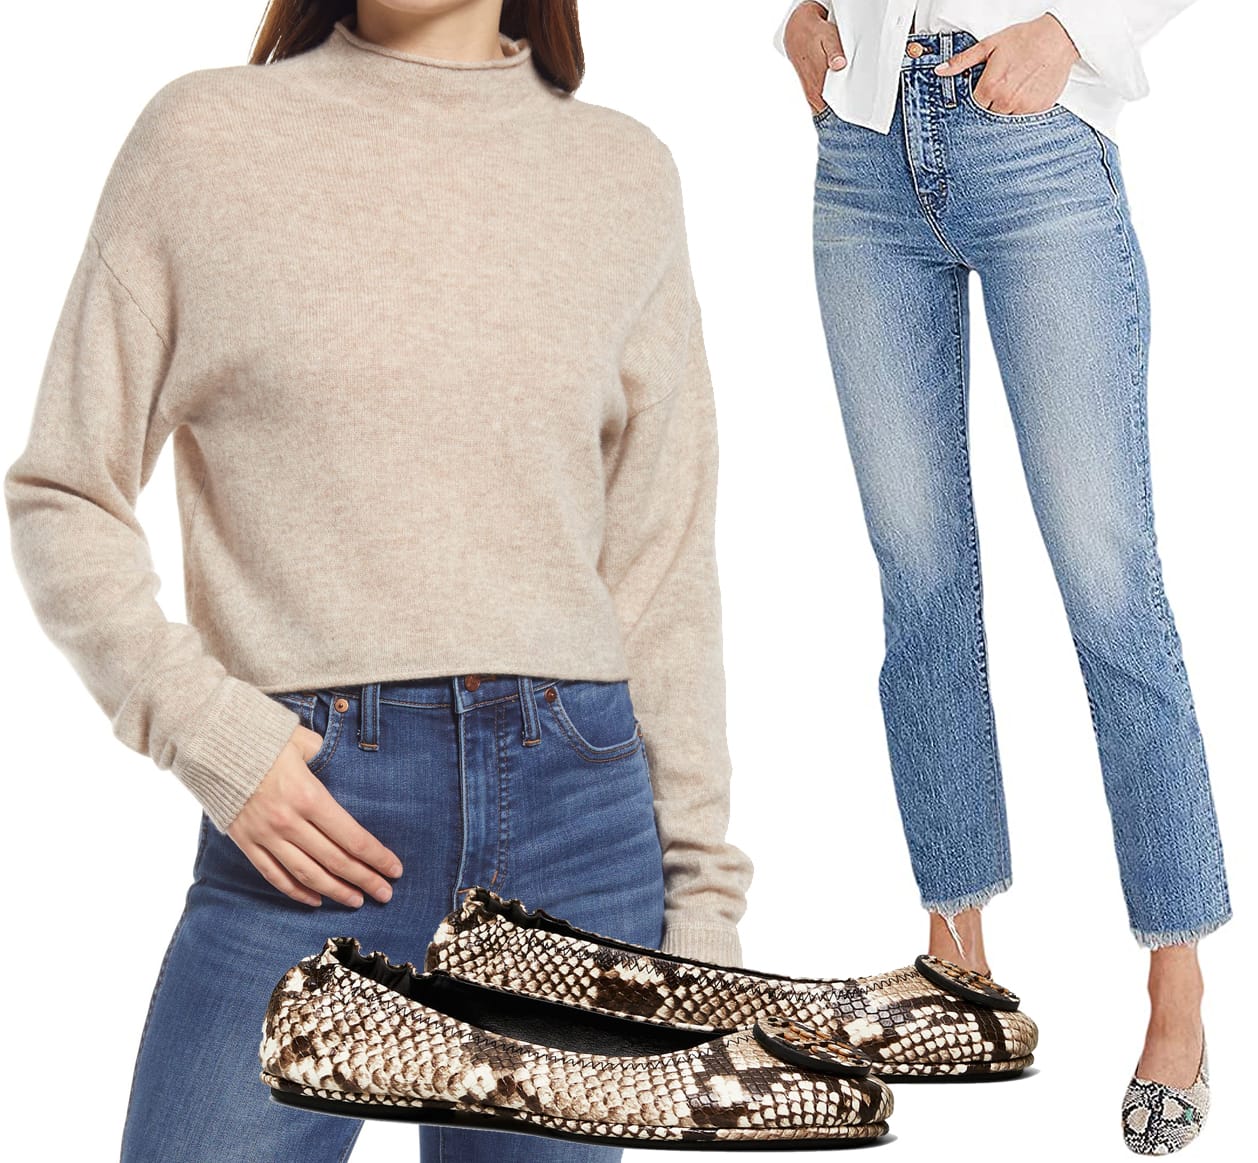 Reformation Cashmere & Wool Crop Roll Neck Sweater, Tory Burch Minnie Travel Ballet Flats, Madewell The Perfect Vintage Jean in Ainsworth Wash